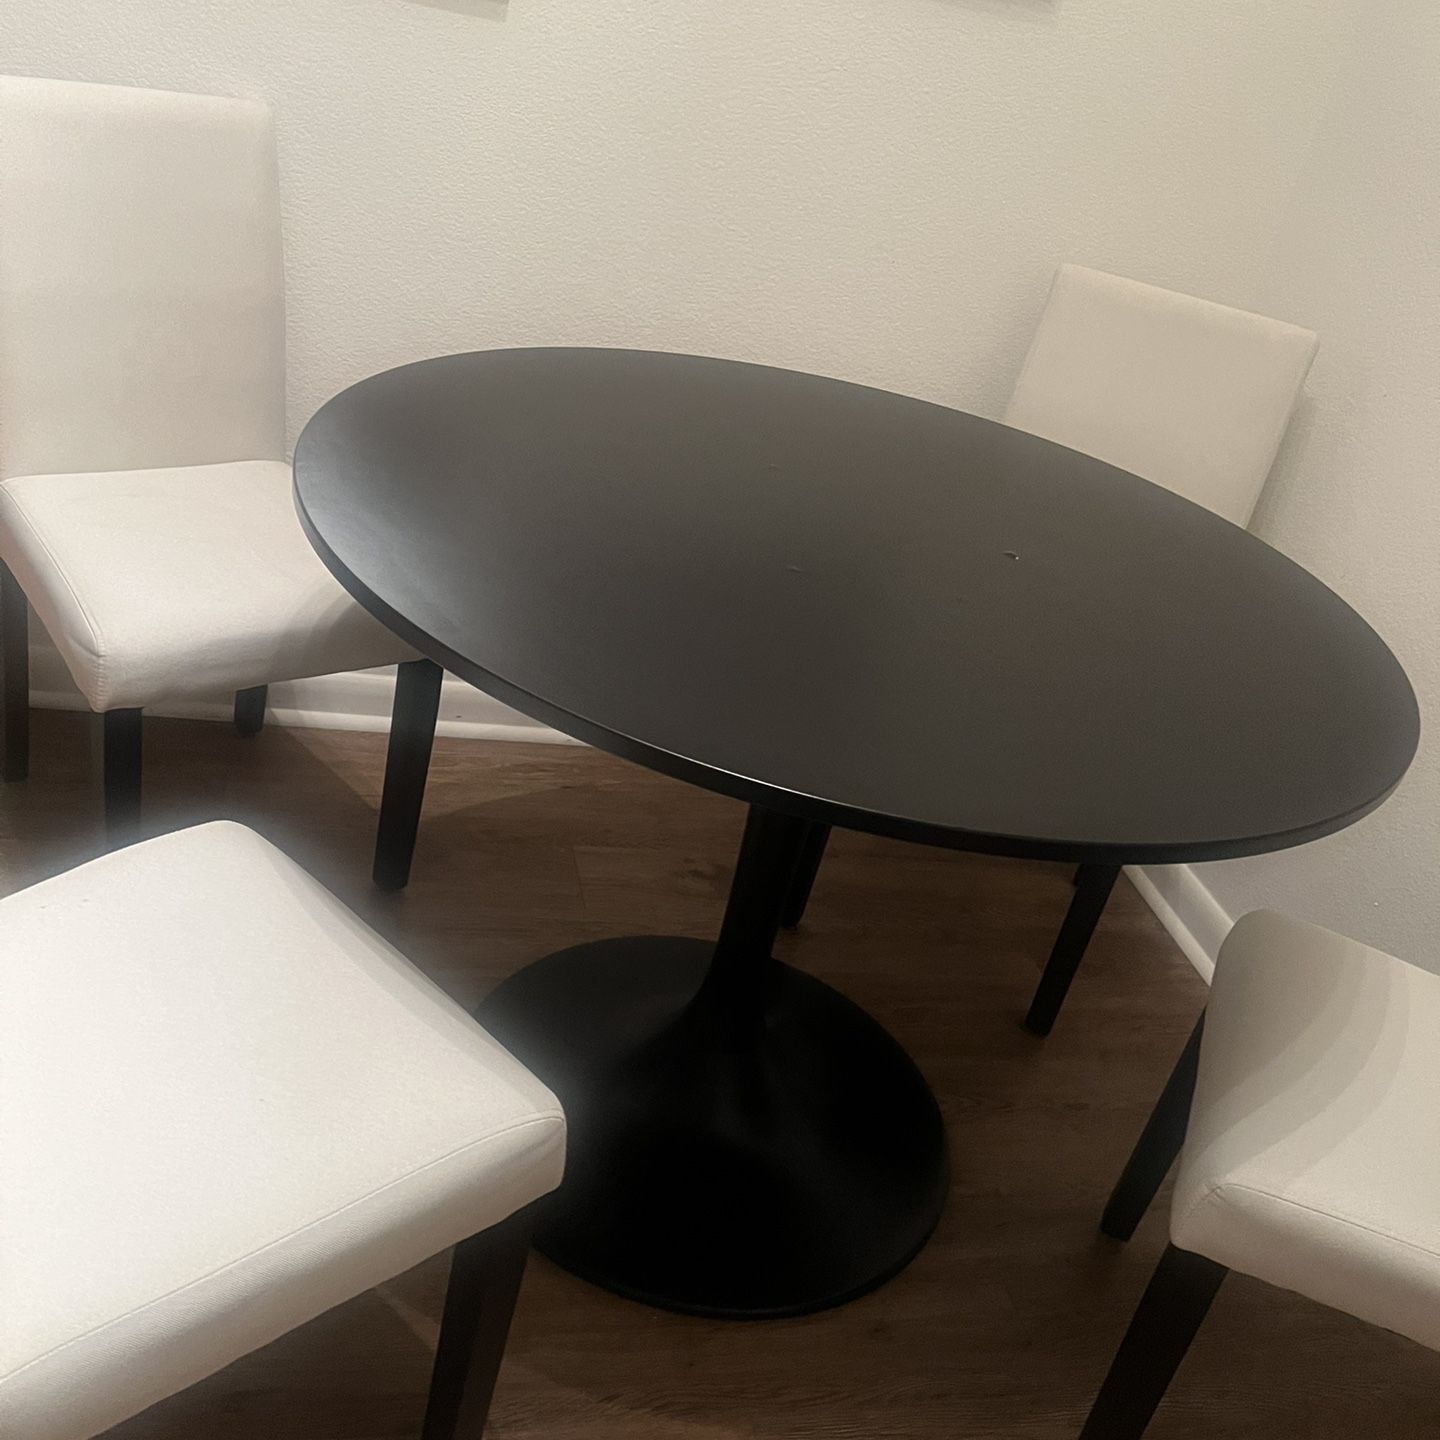 Table x4 Chairs $140